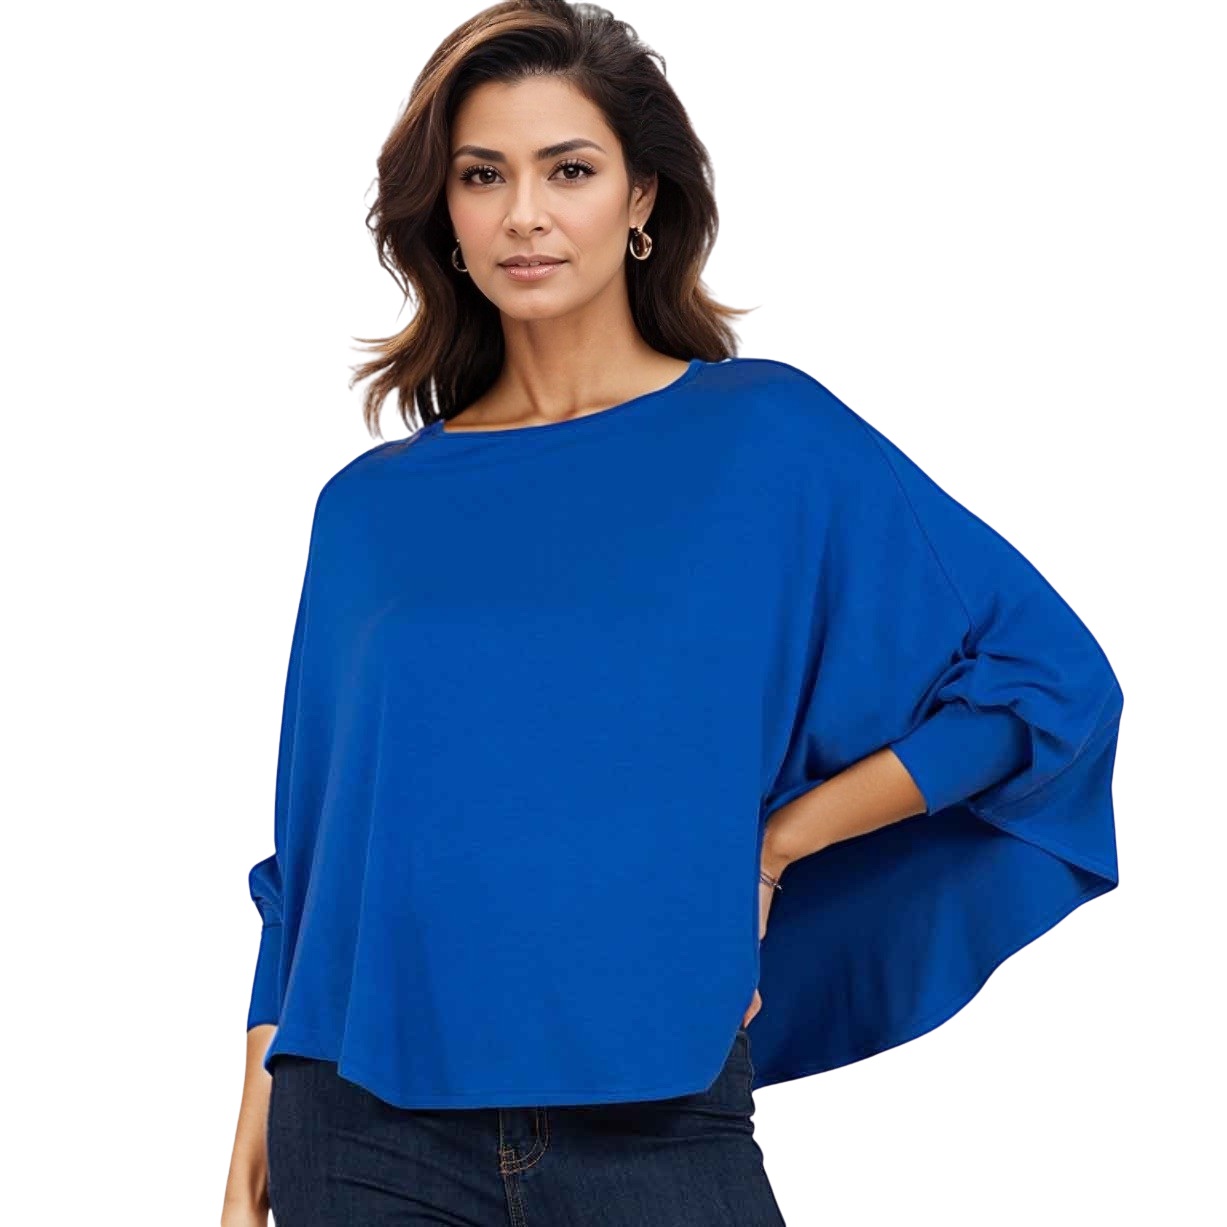 1818 - Blue<br>
Poncho with Sleeves